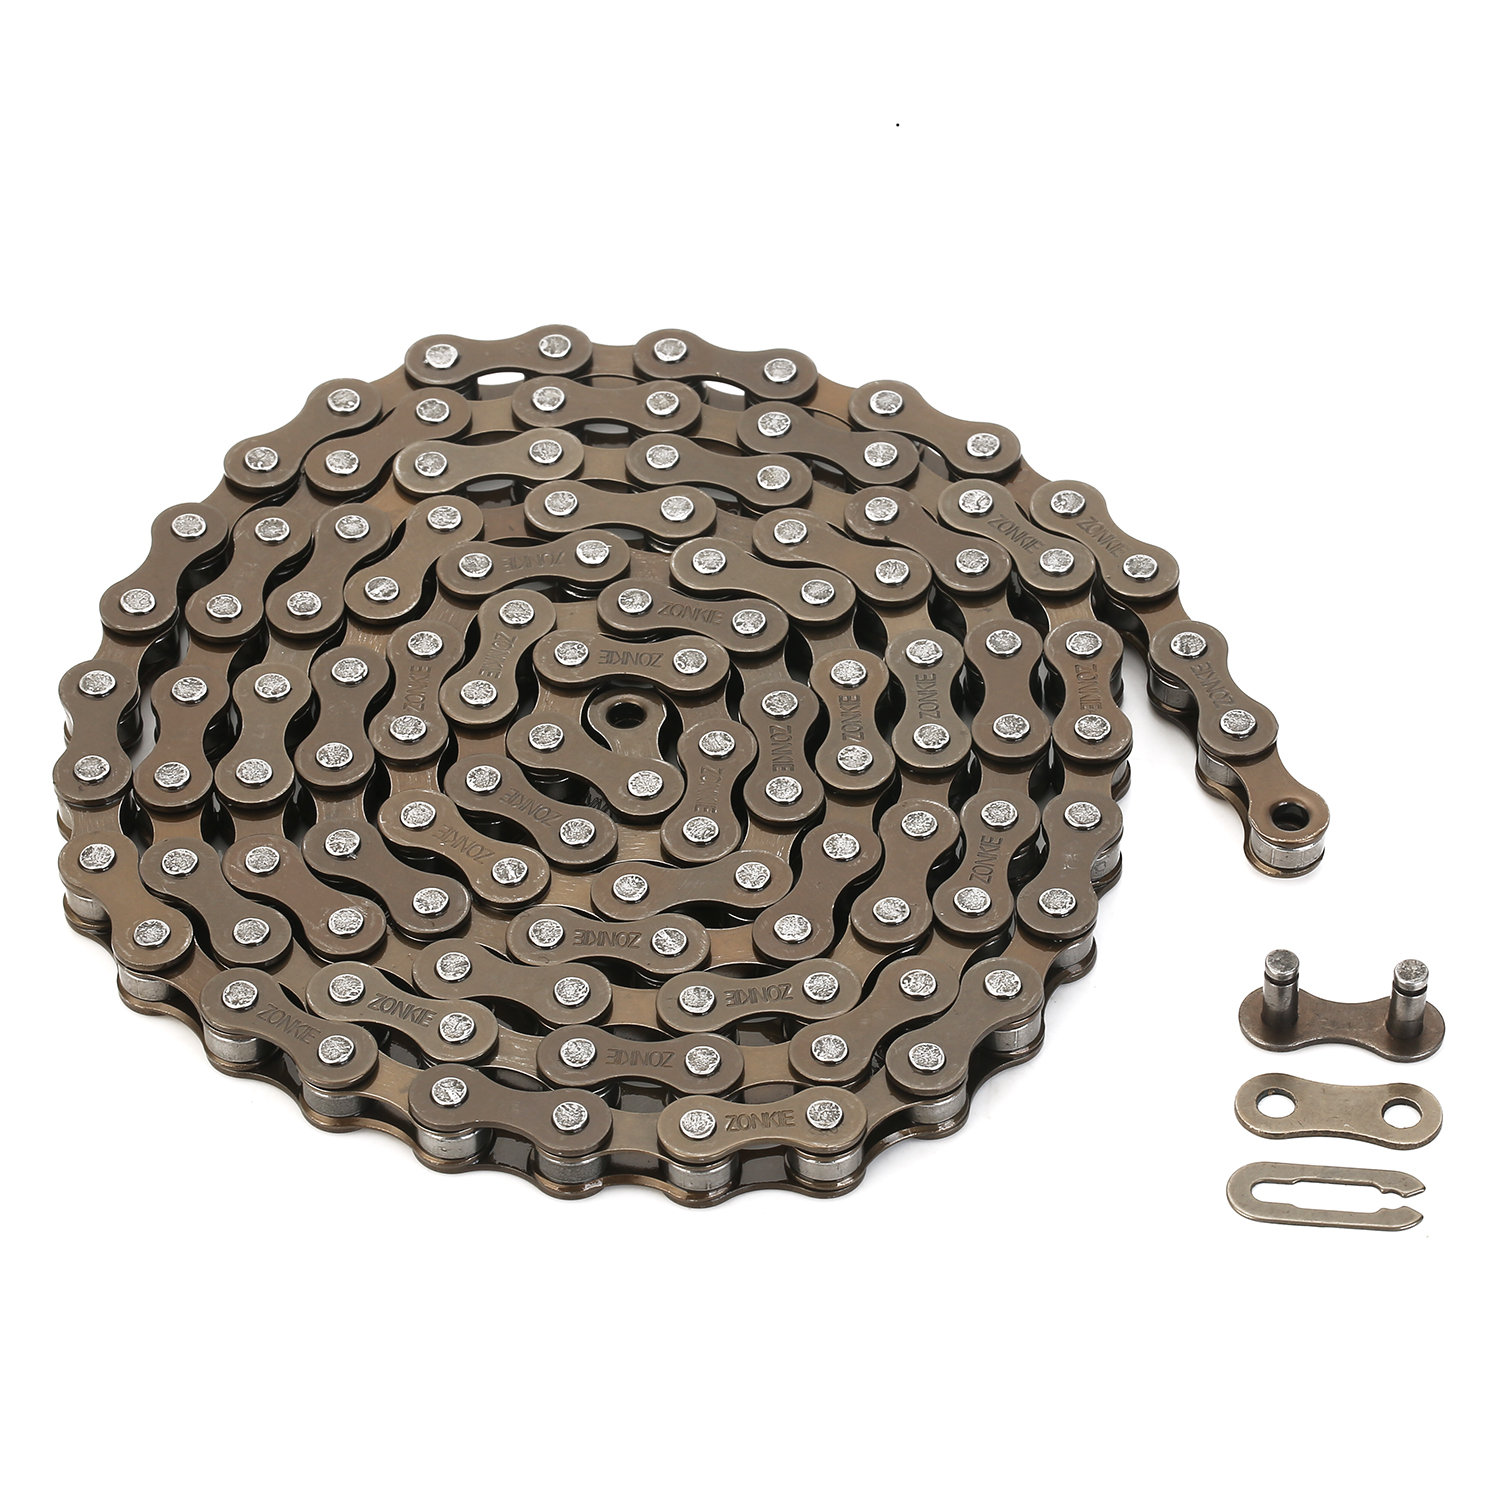 Single-Speed Bicycle Chains 1/2 x 1/8 Inch